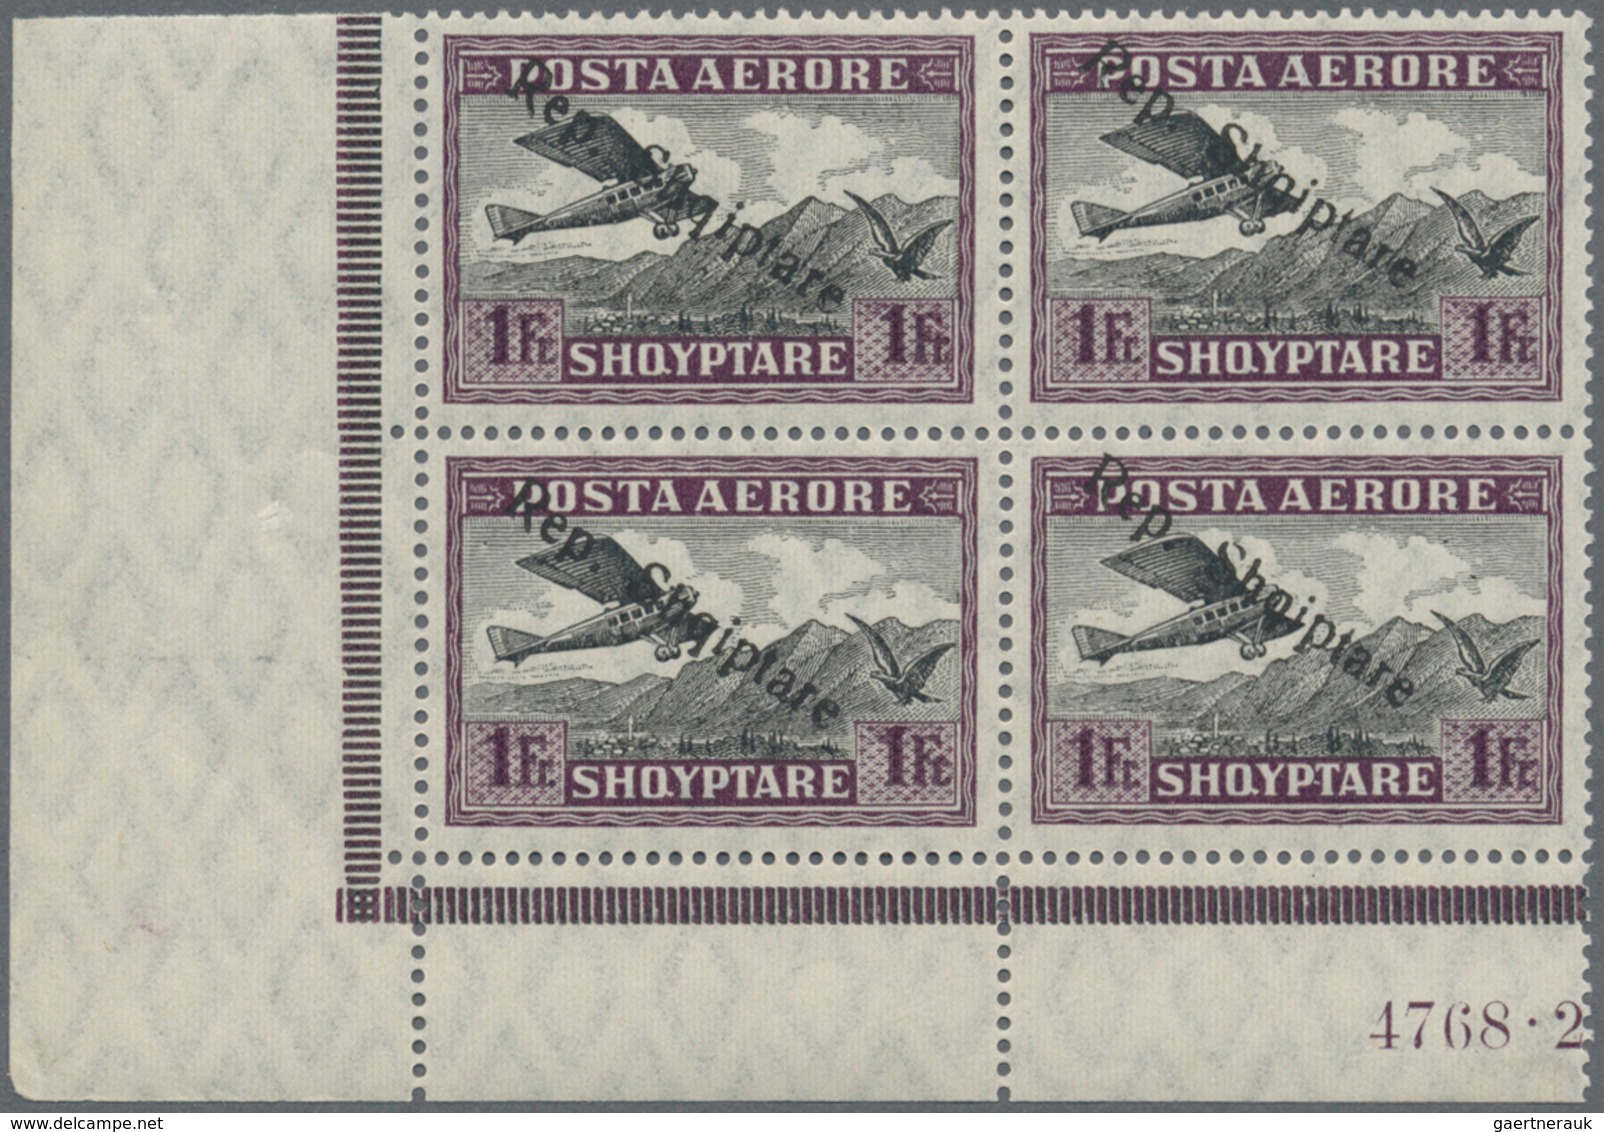 Albanien: 1927, 50 Q, 1 F And 2 F Airmail Stamps With Ovp "Rep.Shqiptare", 3 Lower Left Corner Block - Albanien